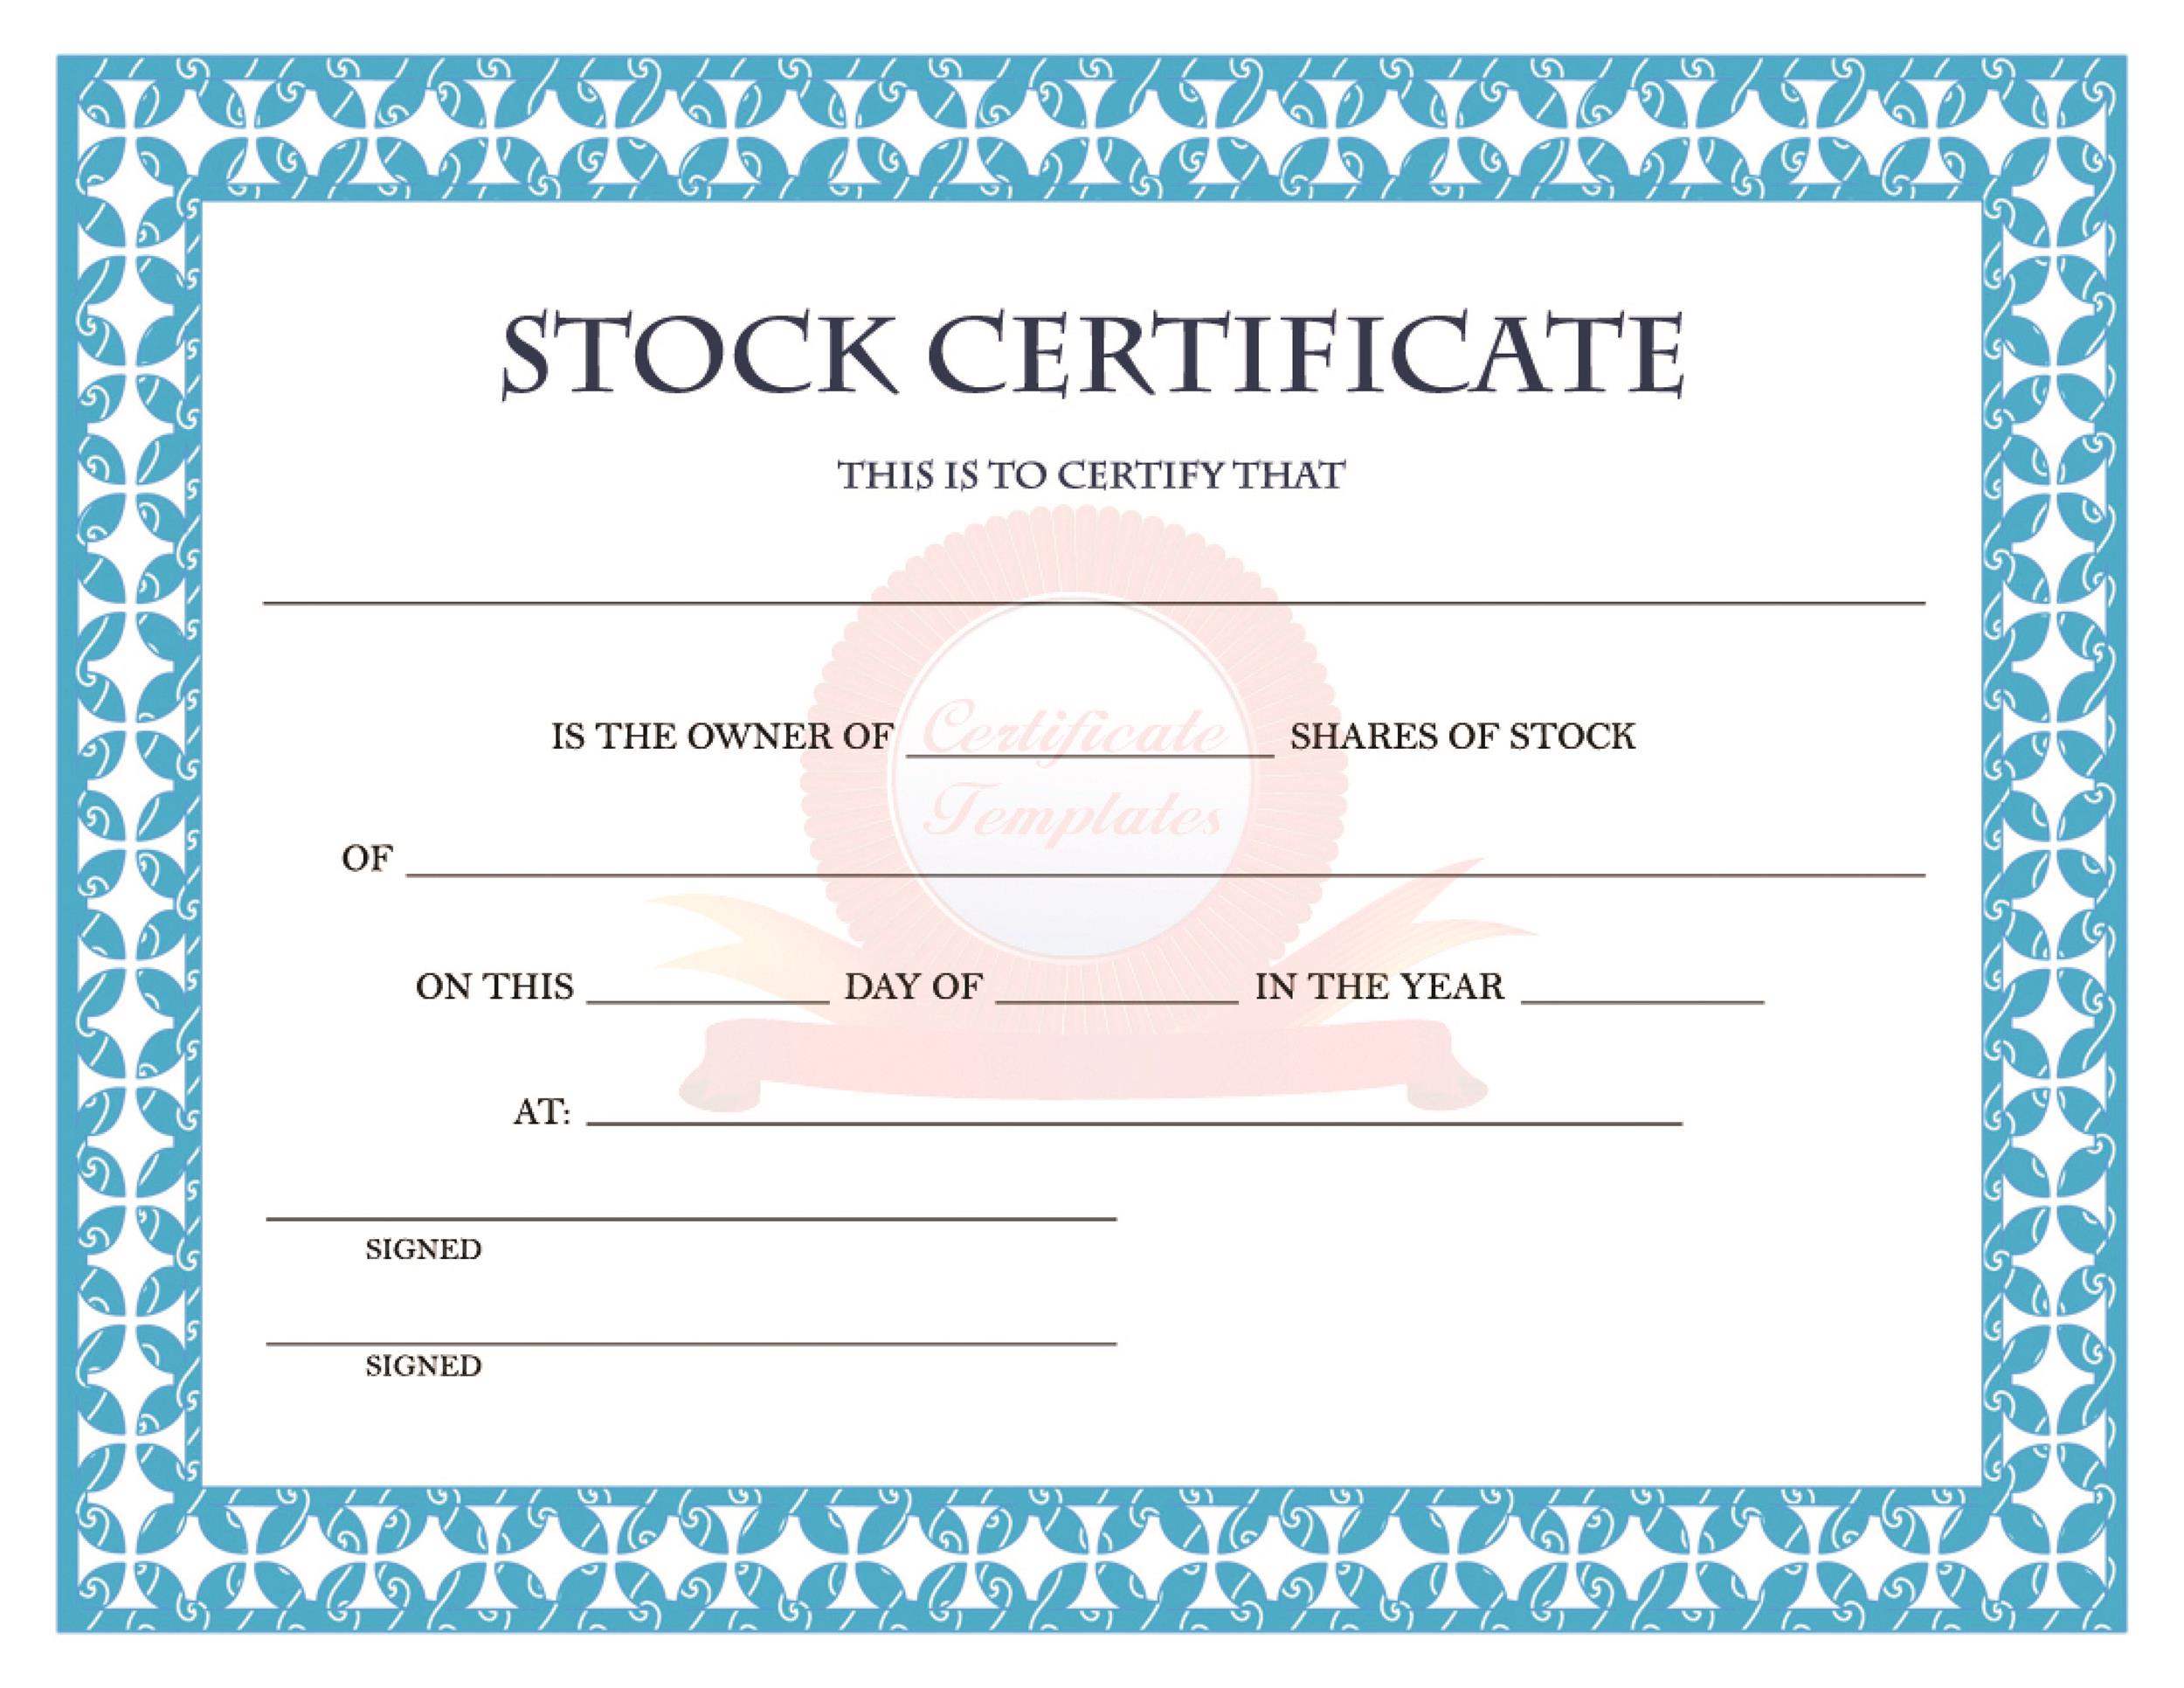 Shareholding Certificate Template Professional Design Template